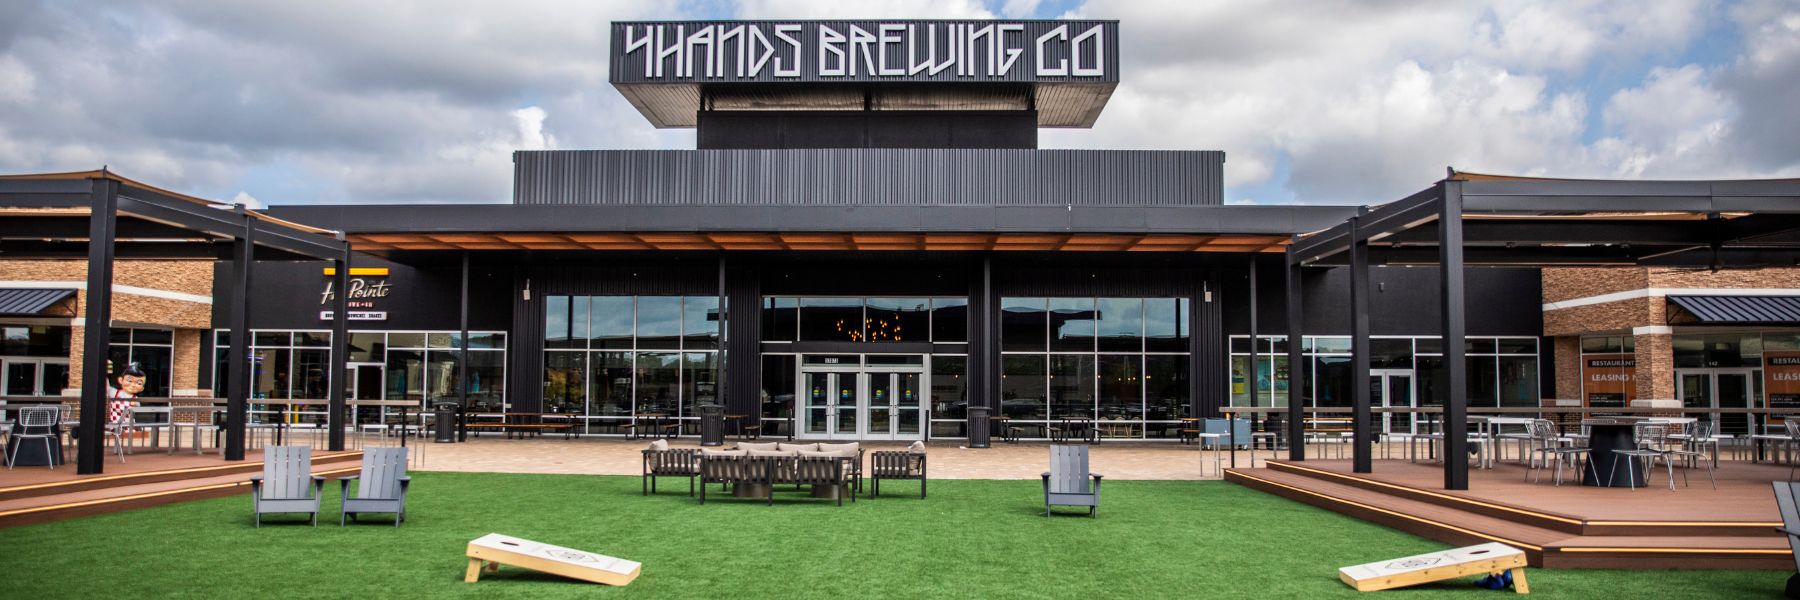 4 Hands at The District features a courtyard where you can play cornhole, watch sports games and listen to live music.